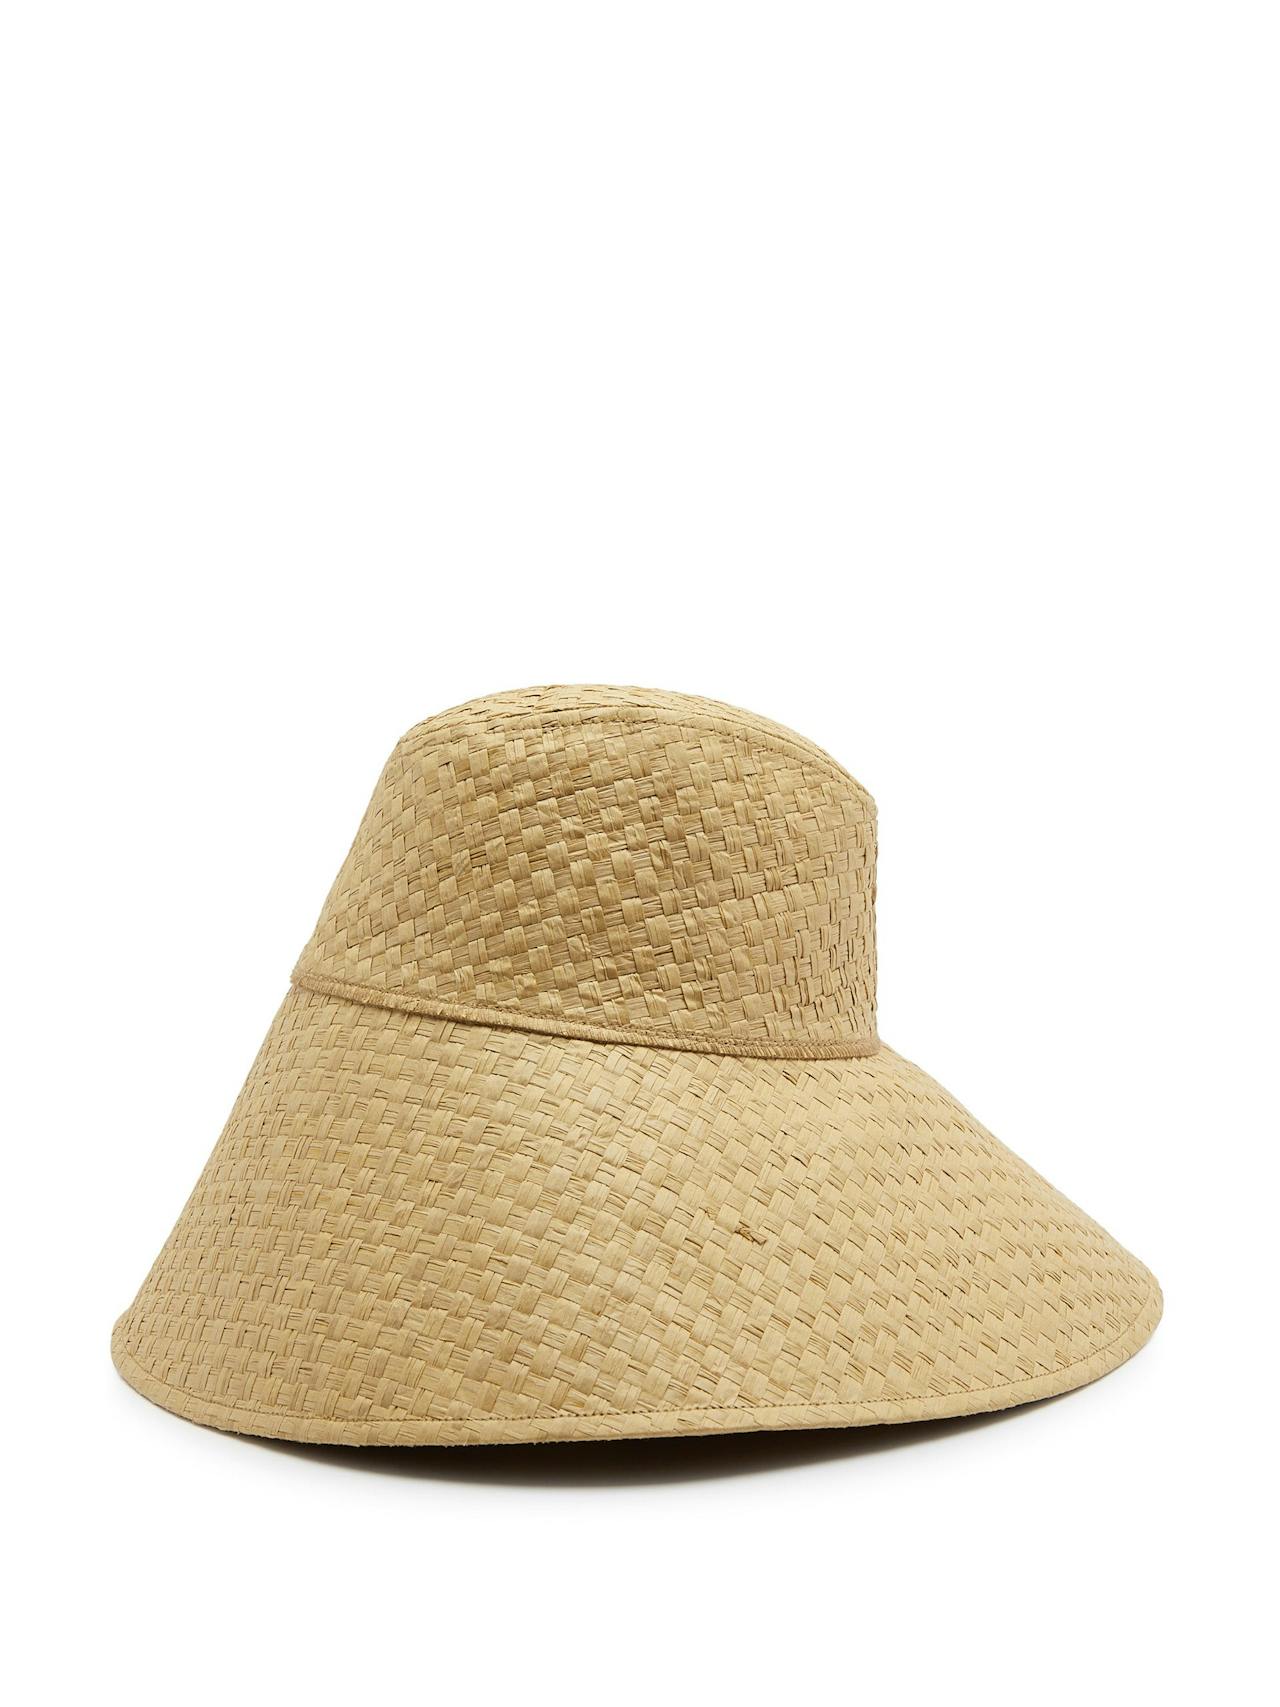 The Cove straw bucket hat